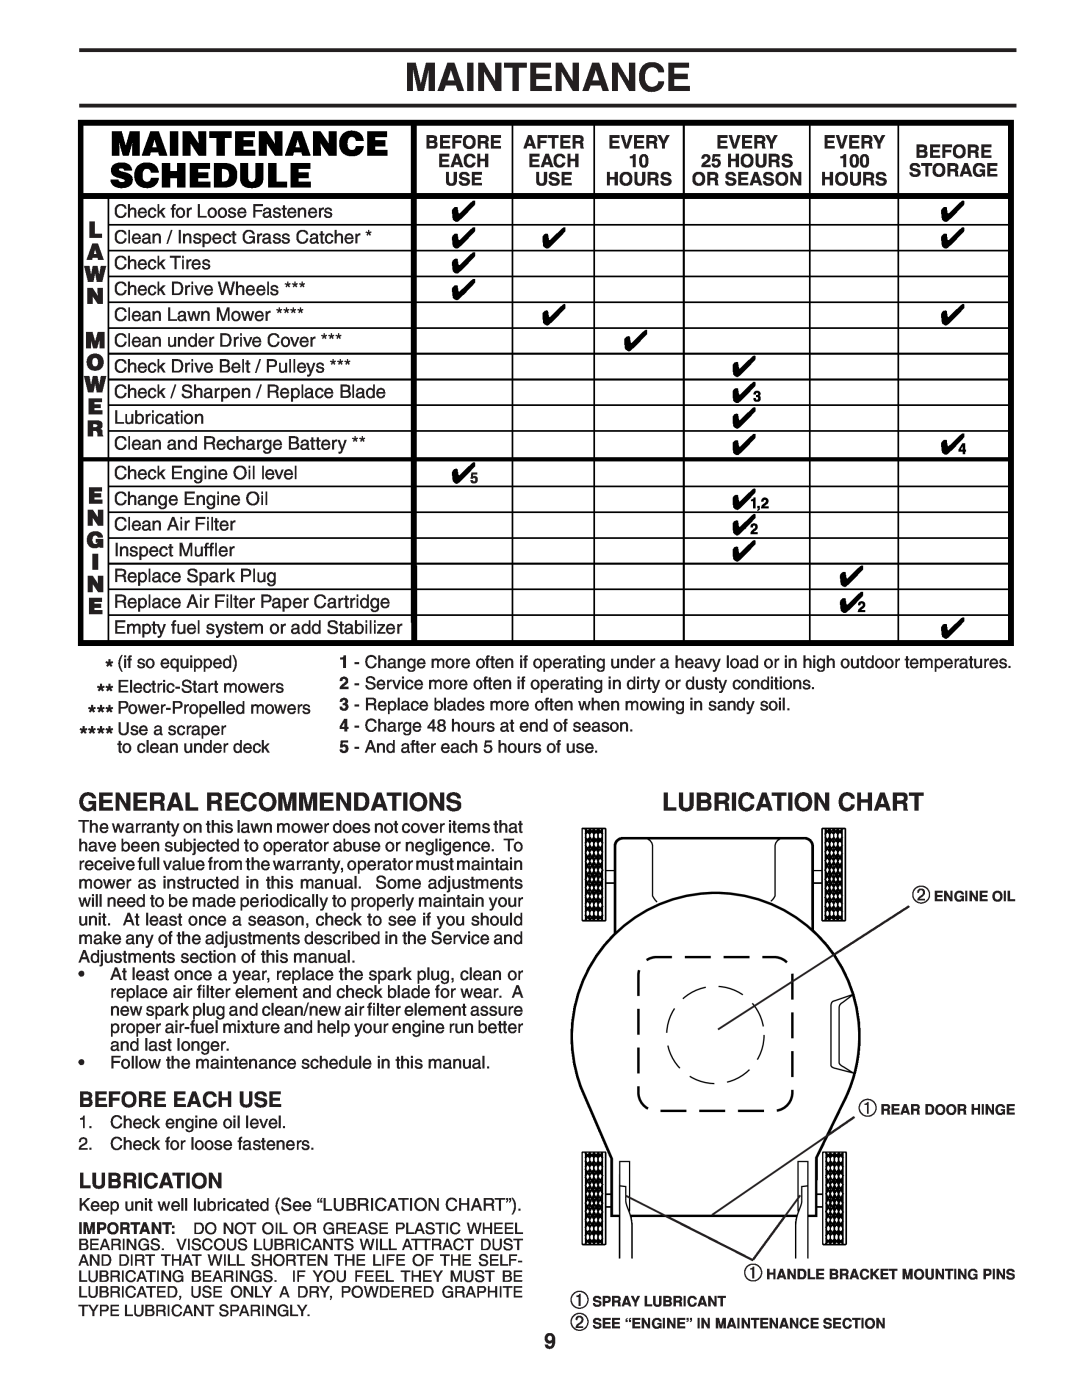 Husqvarna 961430097 Maintenance, General Recommendations, Lubrication Chart, Before Each Use, After, Every, Storage, Hours 